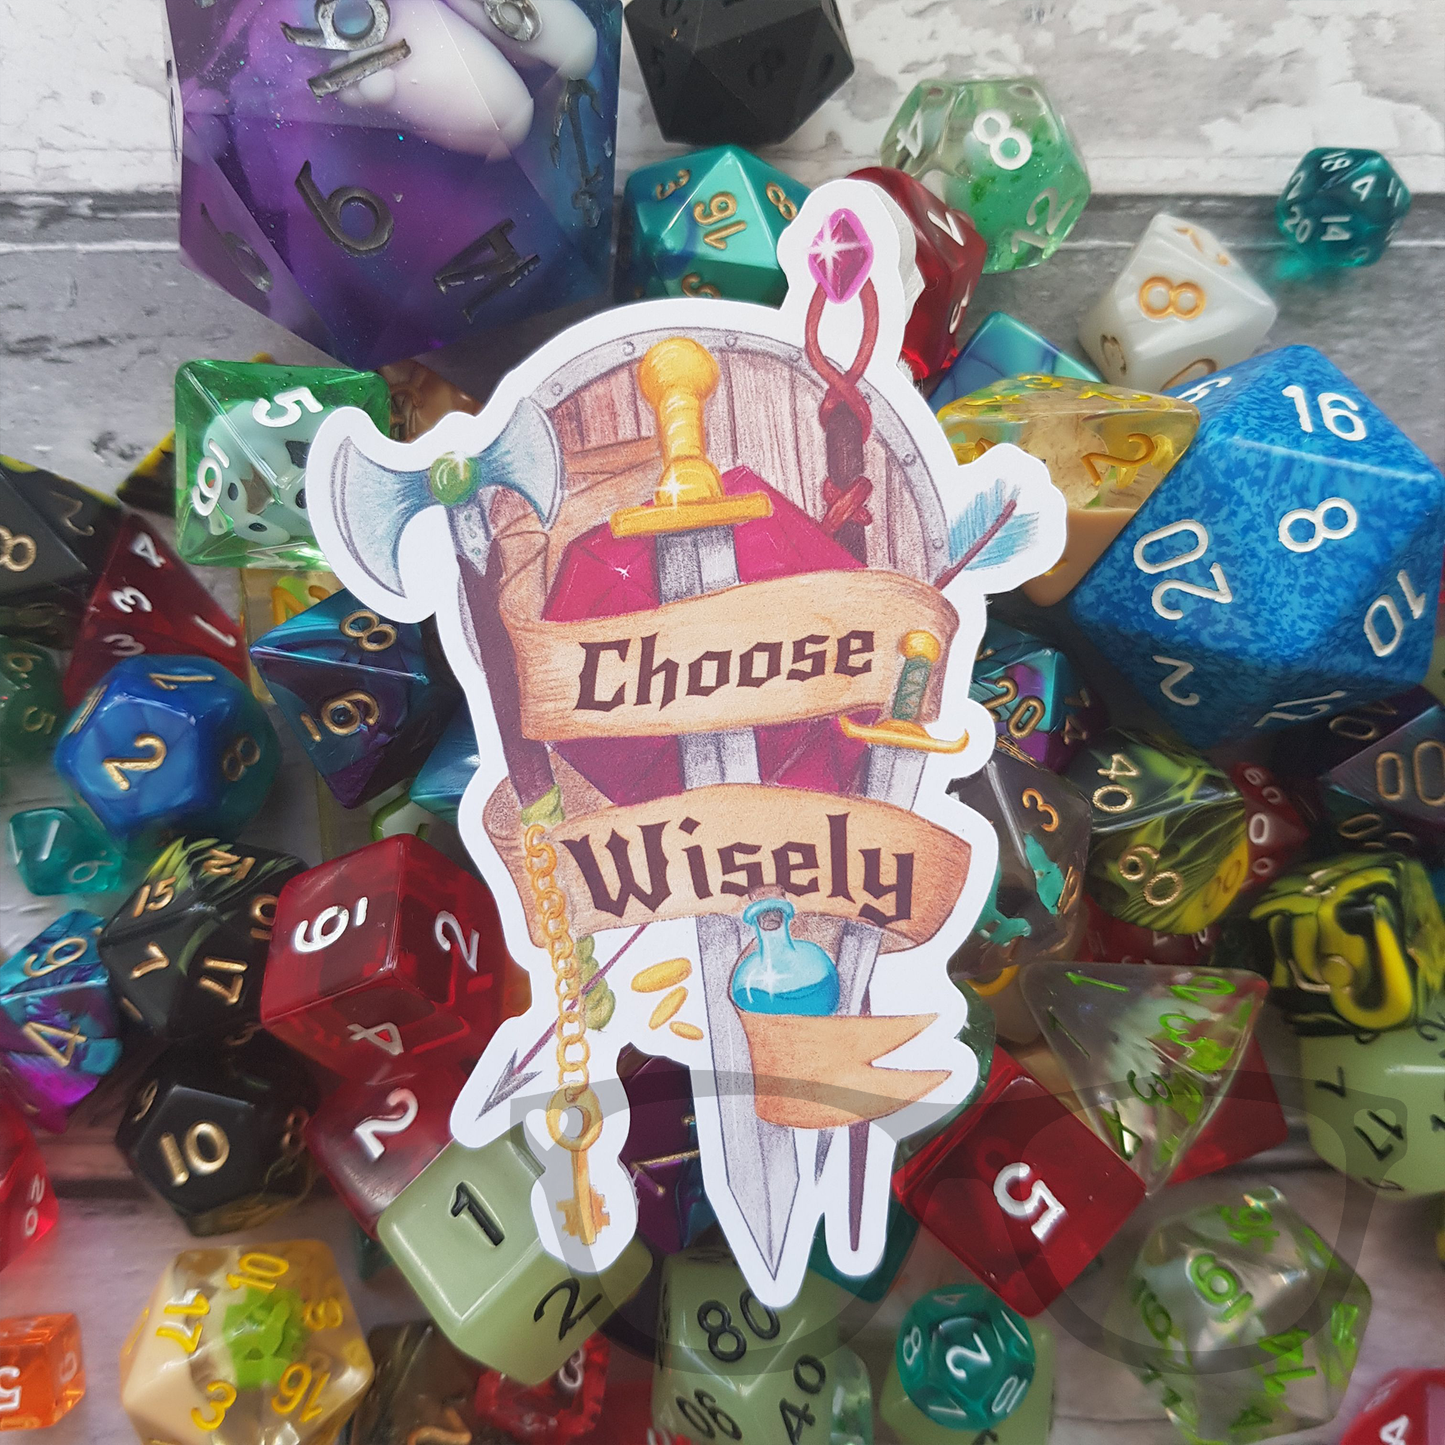 Choose wisely sticker. A watercolour illustration showing a range items used in tabletop RPGs with text that reads "Choose wisely" a big pile of dice is shown in the background.